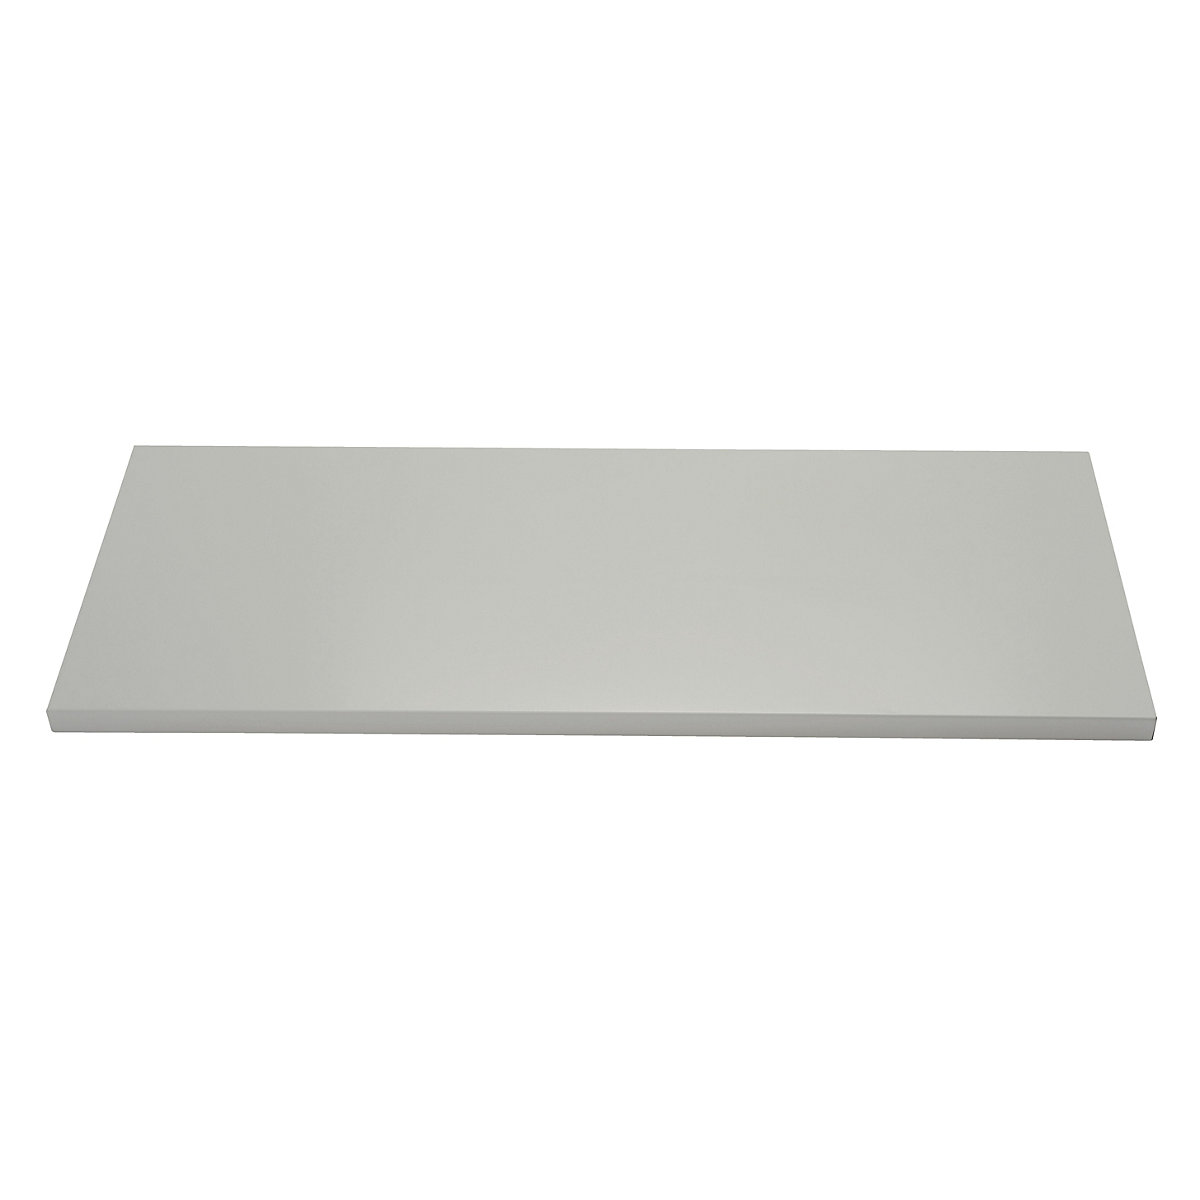 Shelf with lateral suspension device – BISLEY, for WxD 914 x 400 mm, light grey